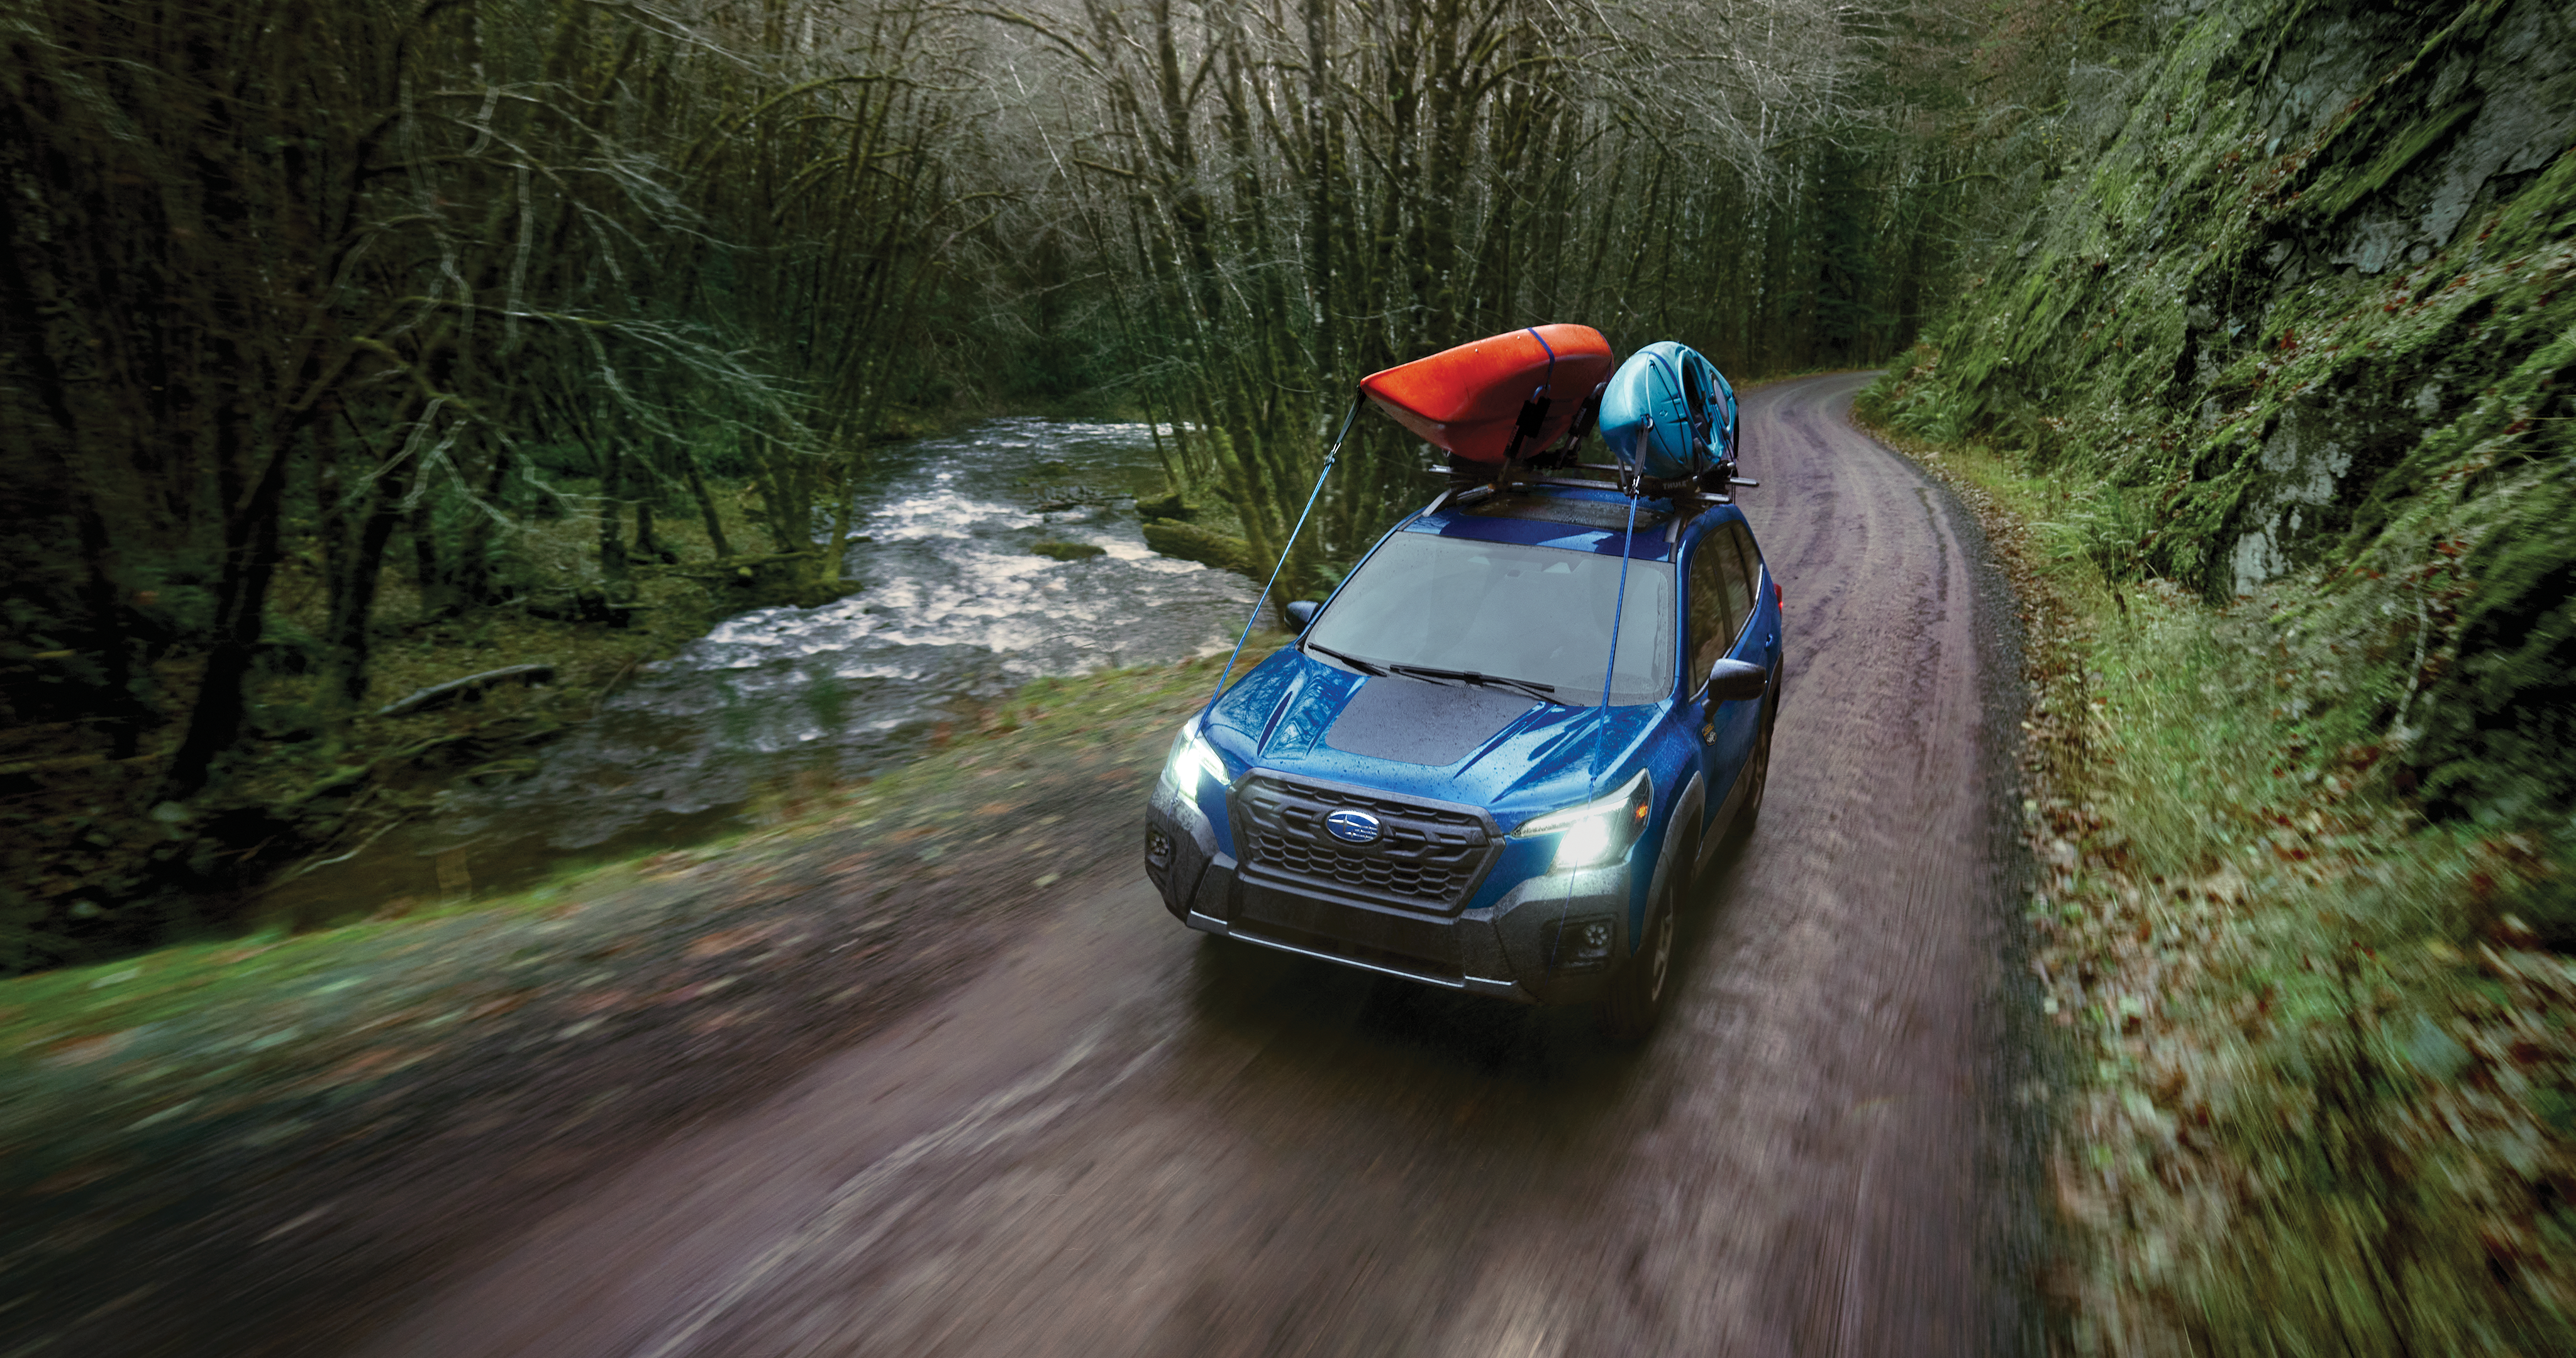 A Subaru Forester carrying two kayaks on its roof drives along a stream in the woods
